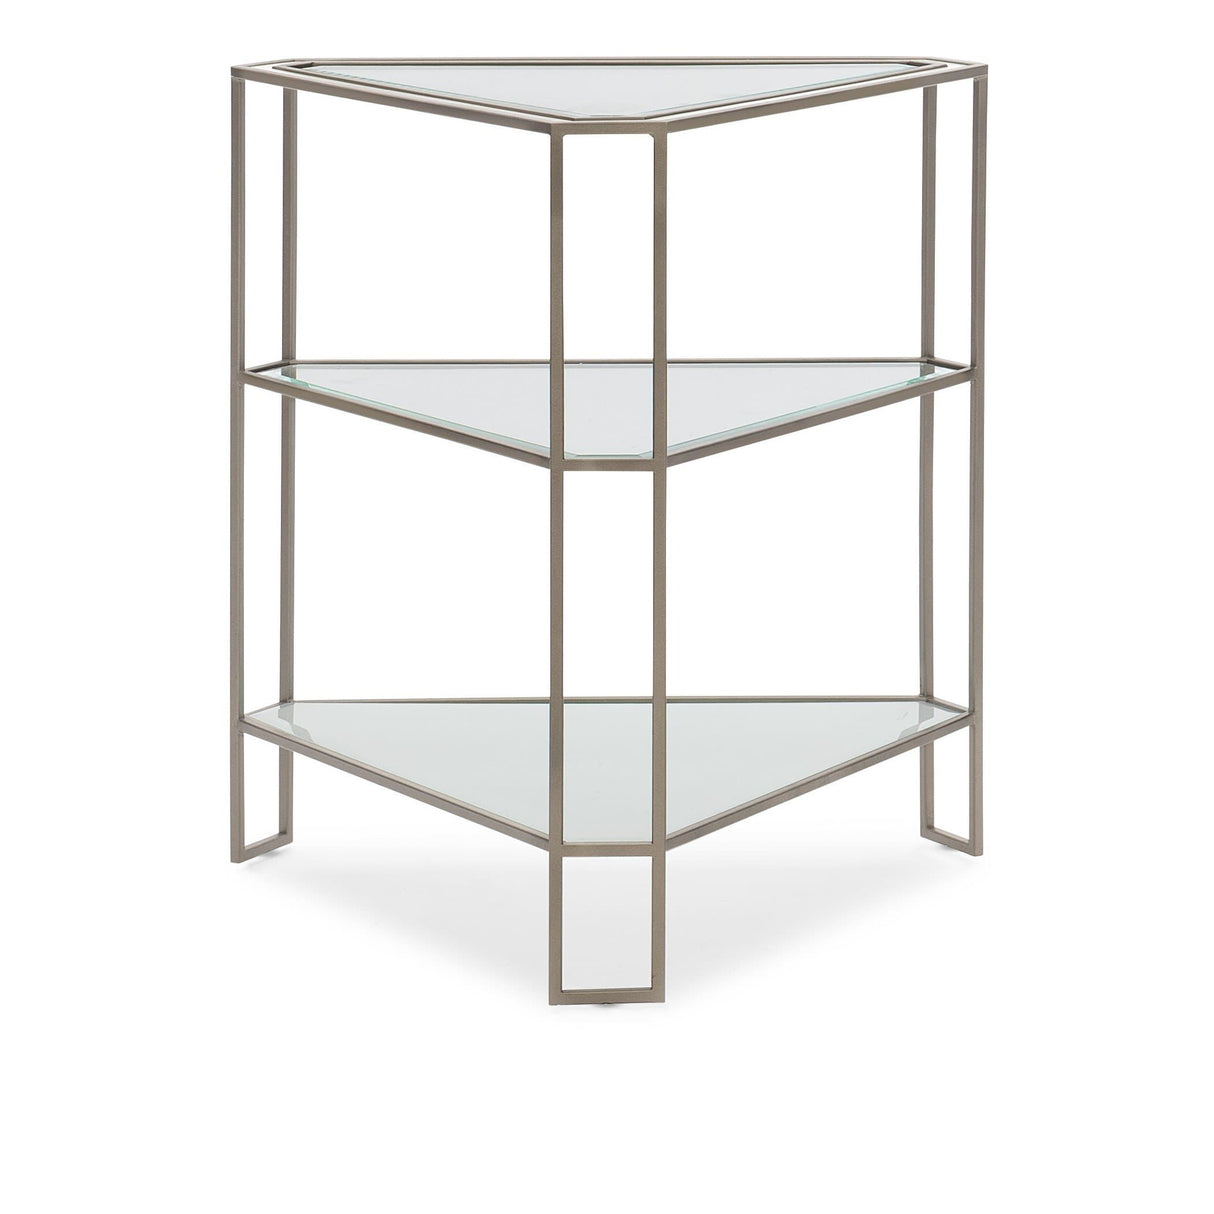 Caracole Stage Left or Right Side Table Furniture caracole-CLA-019-416